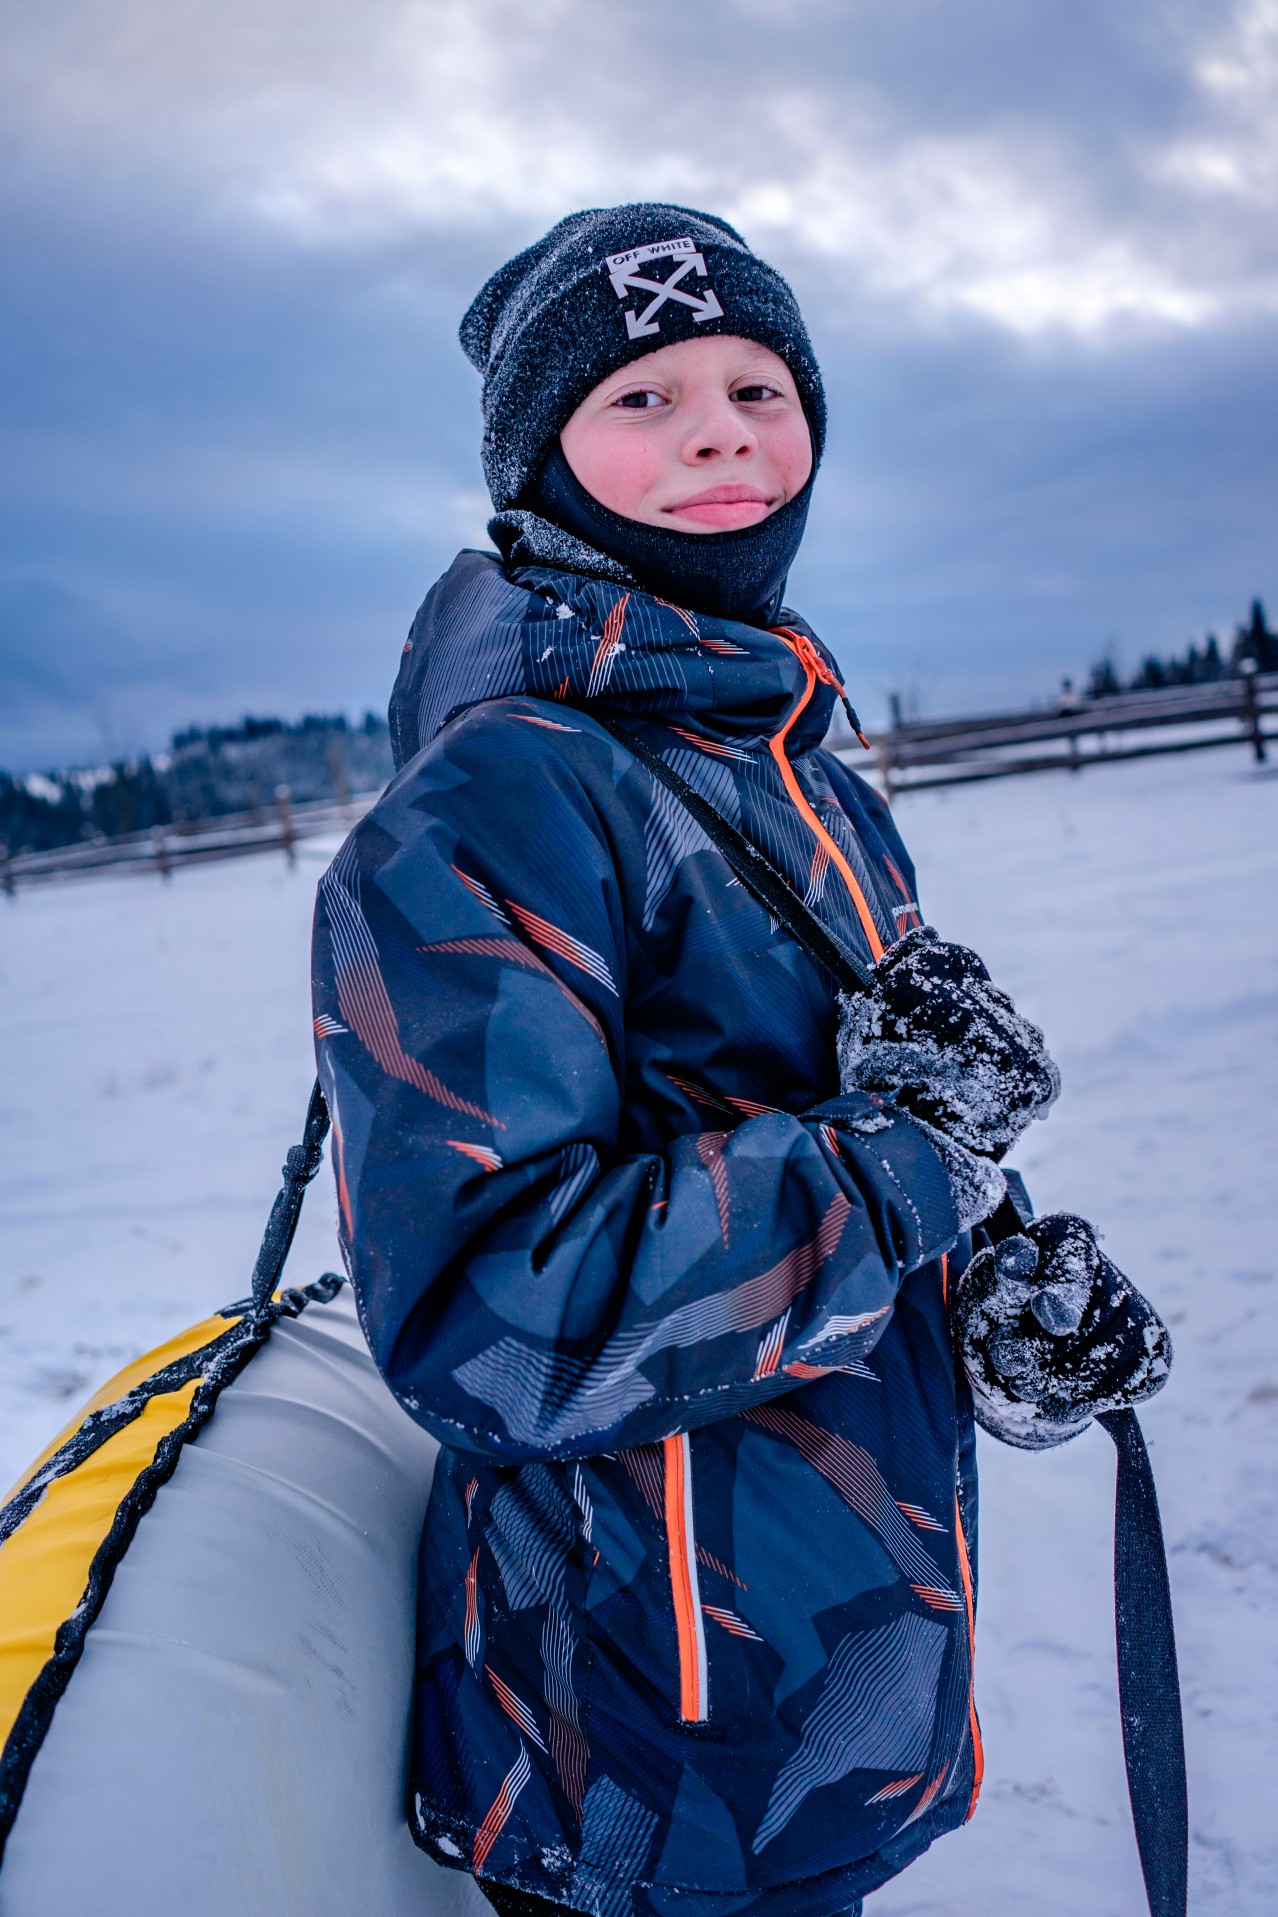 Smiling kid in winter outfit holding winter tube